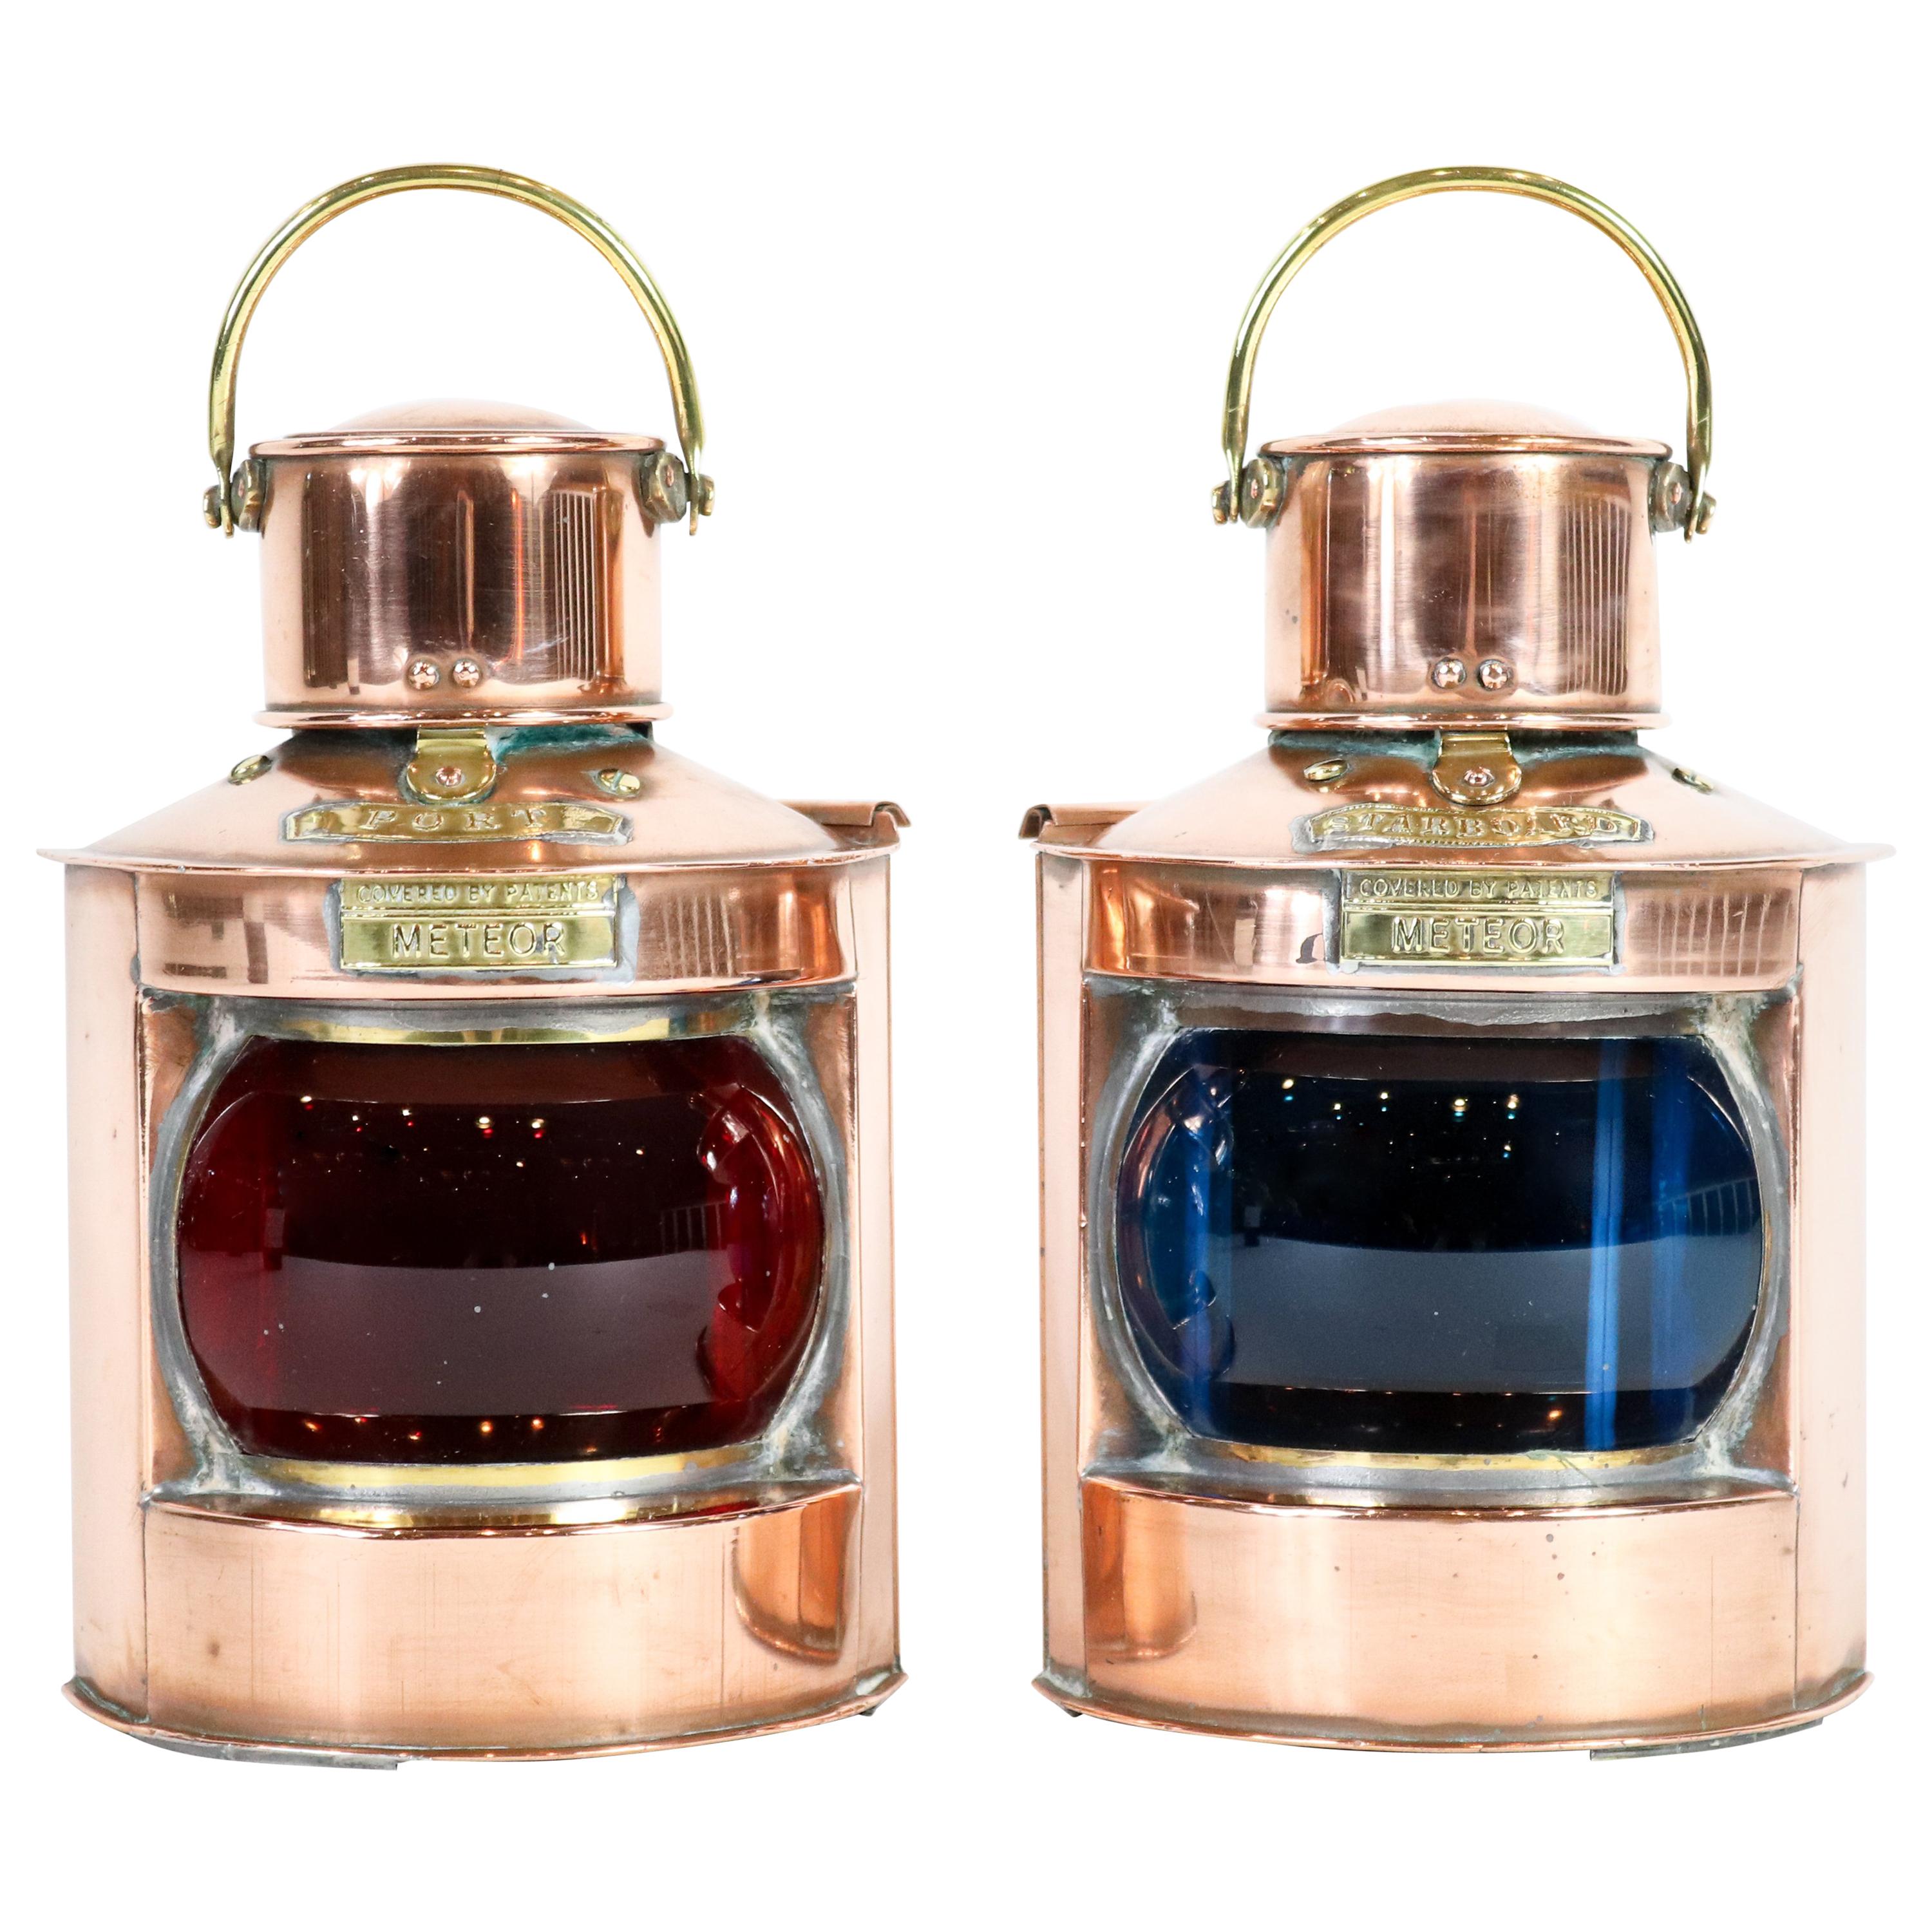 Pair of Port and Starboard Lanterns